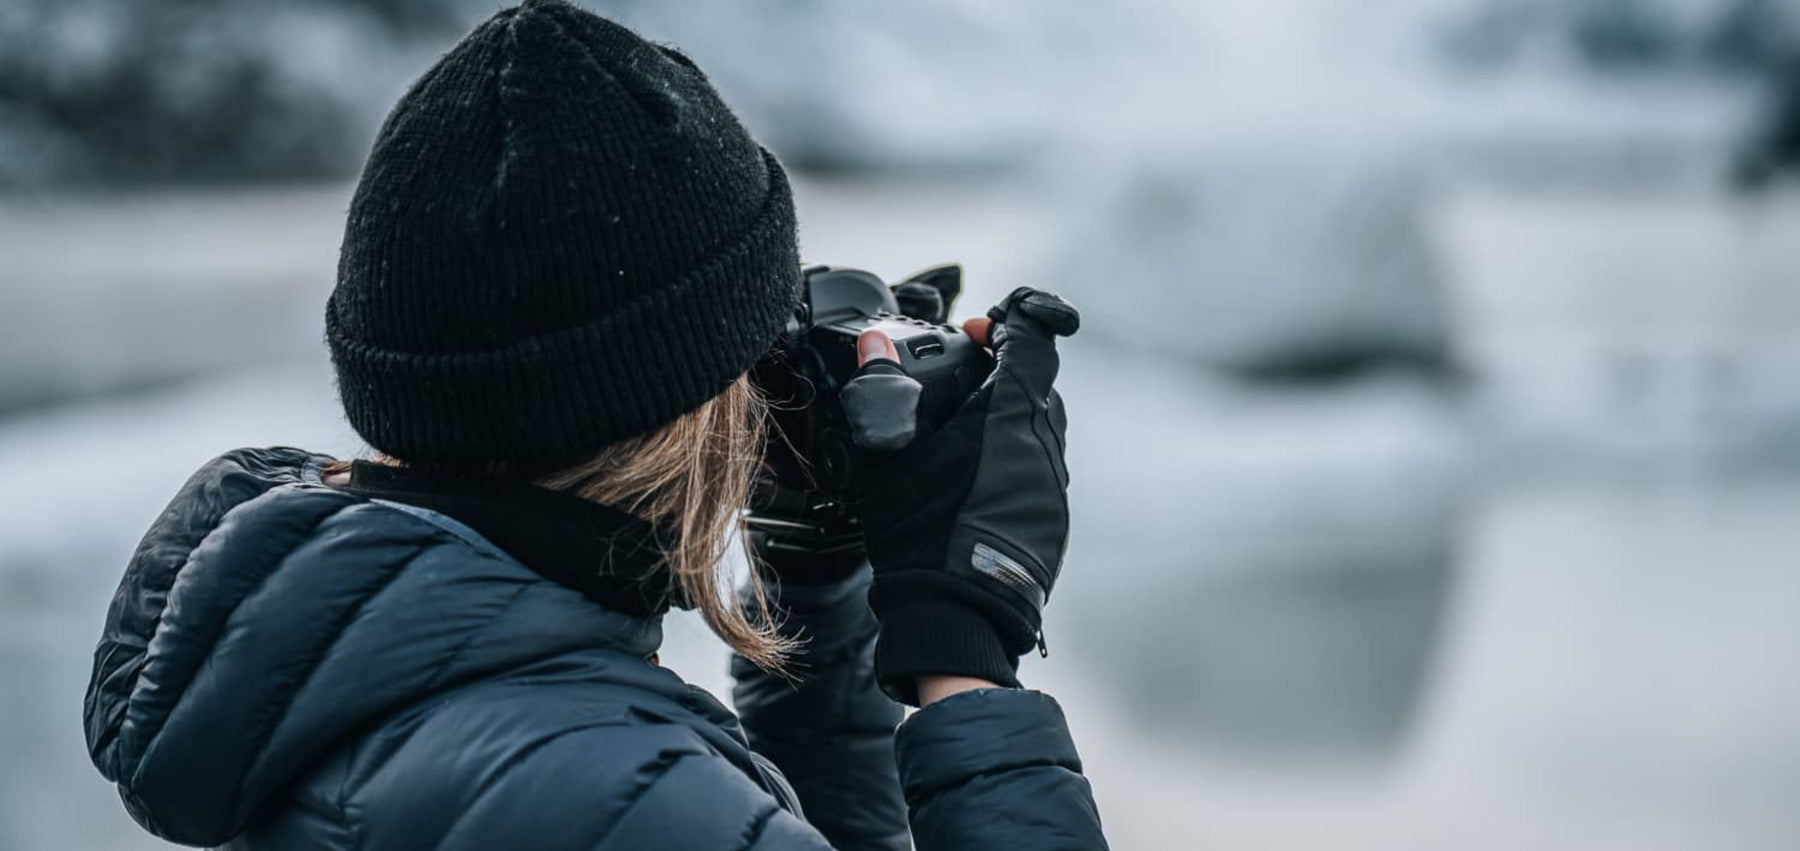 The Best Gloves for Bird Photography - Vallerret Photography Gloves